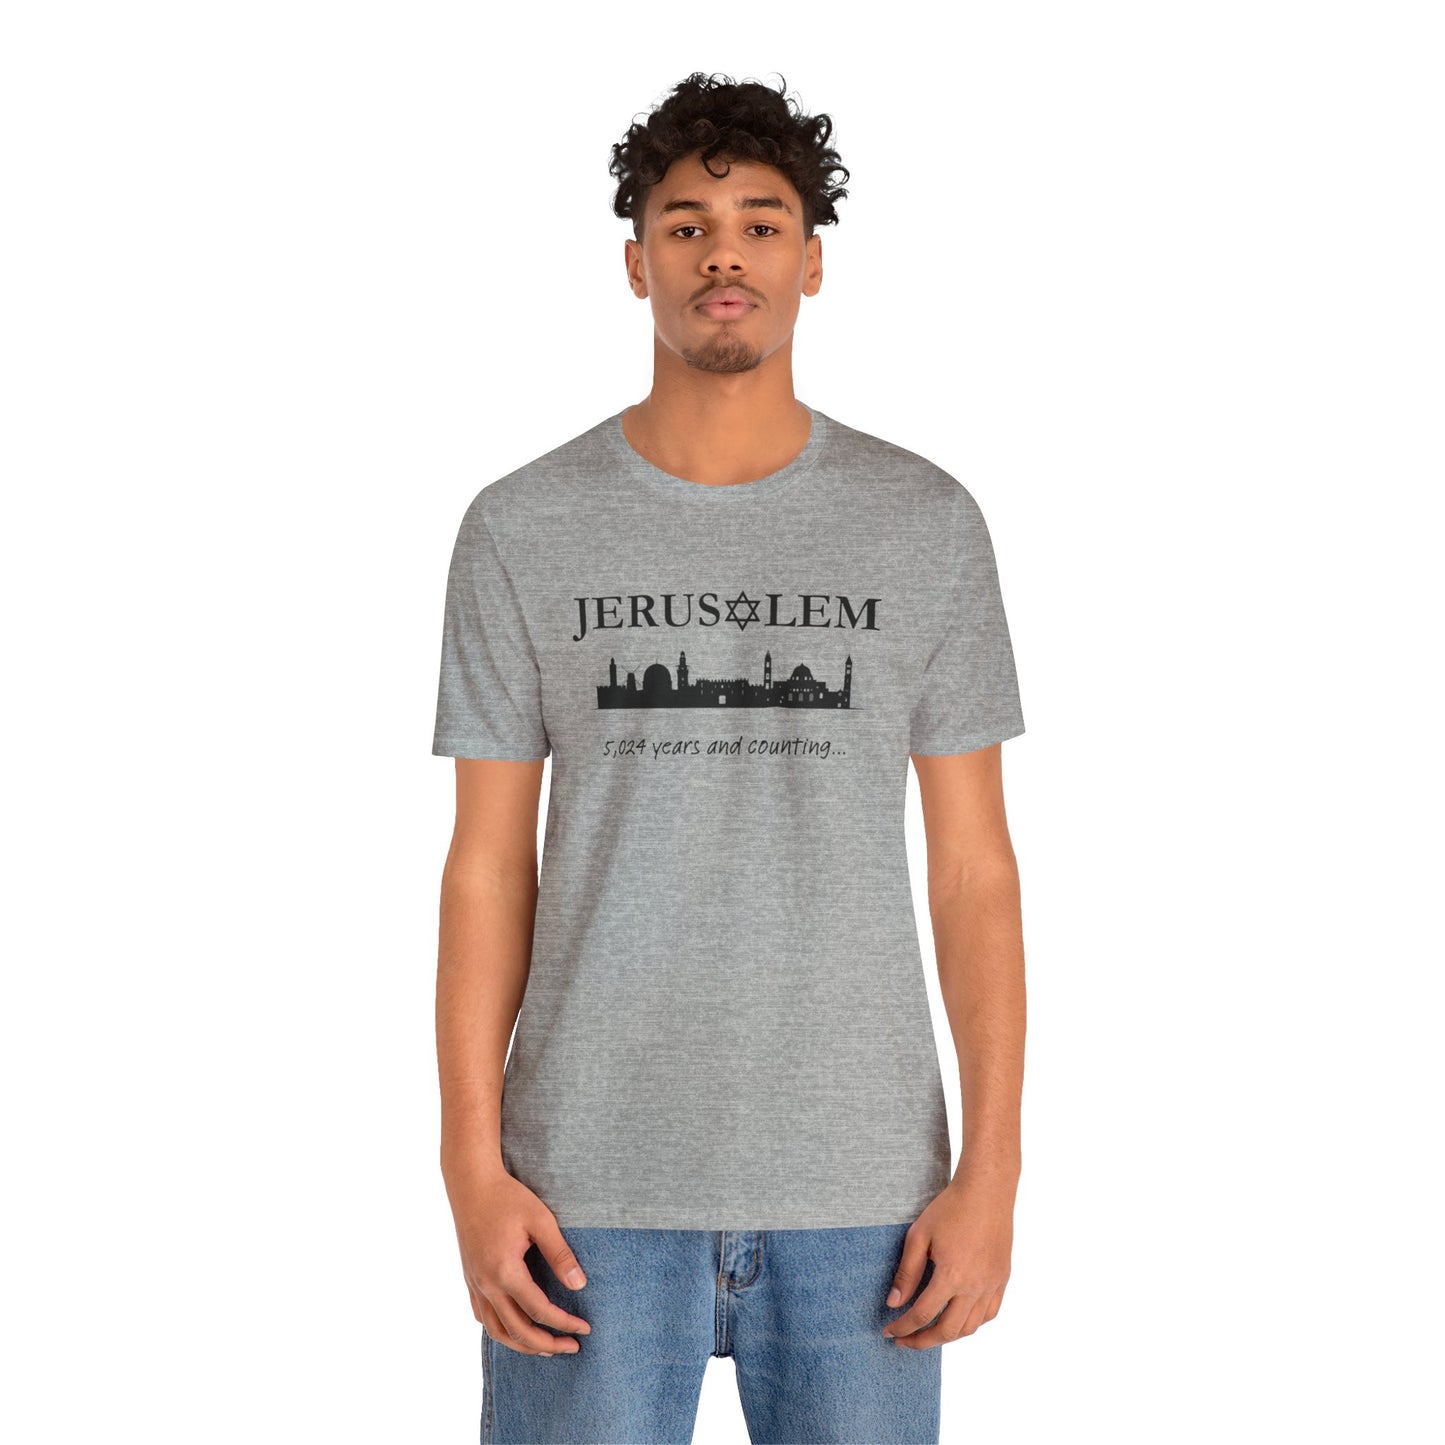 Jerusalem - 5,024 Years and Counting T-shirt